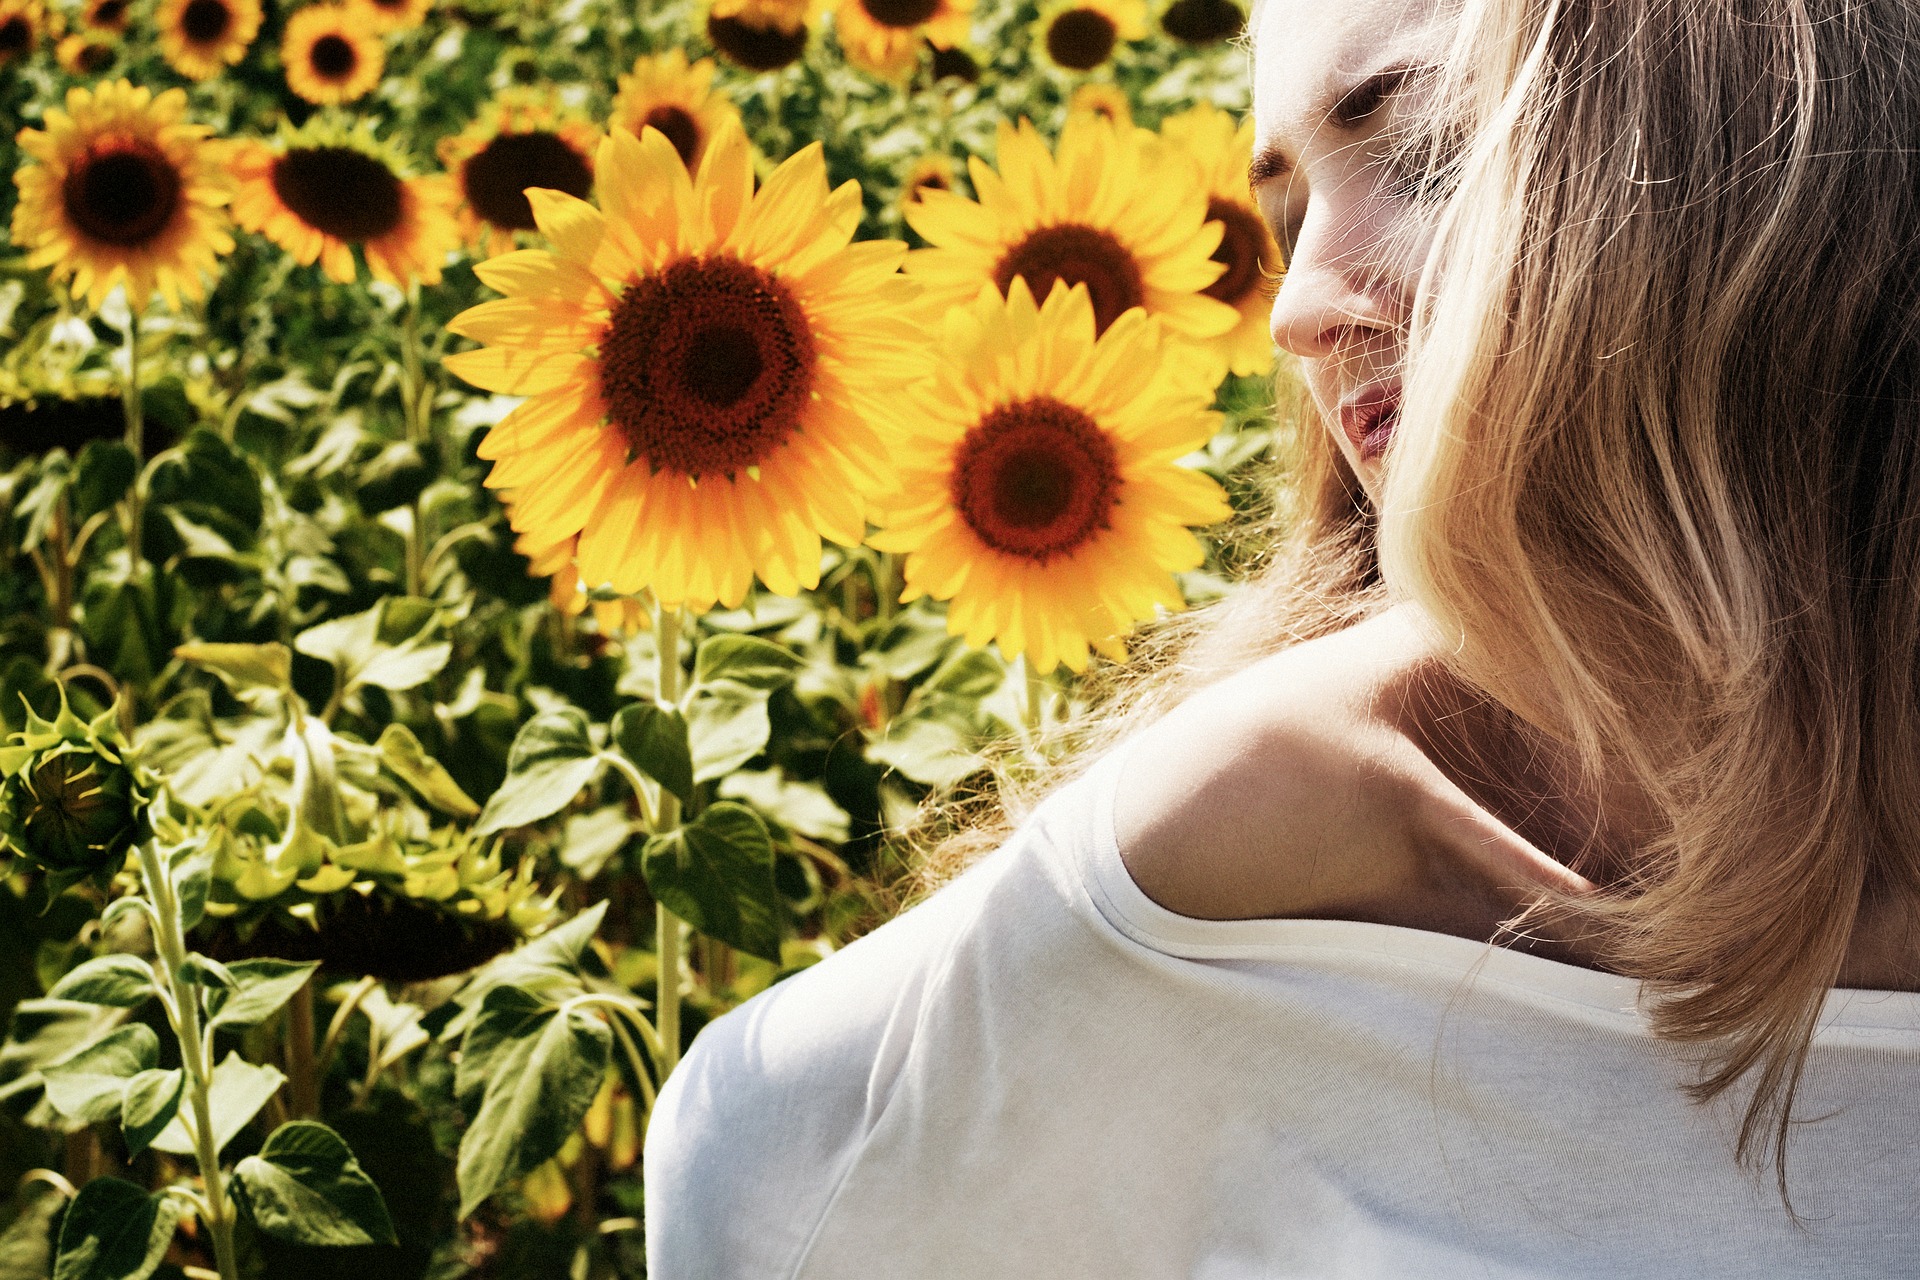 Model in the Sunflower Field, Activity, Blooming, Fashion, Field, HQ Photo